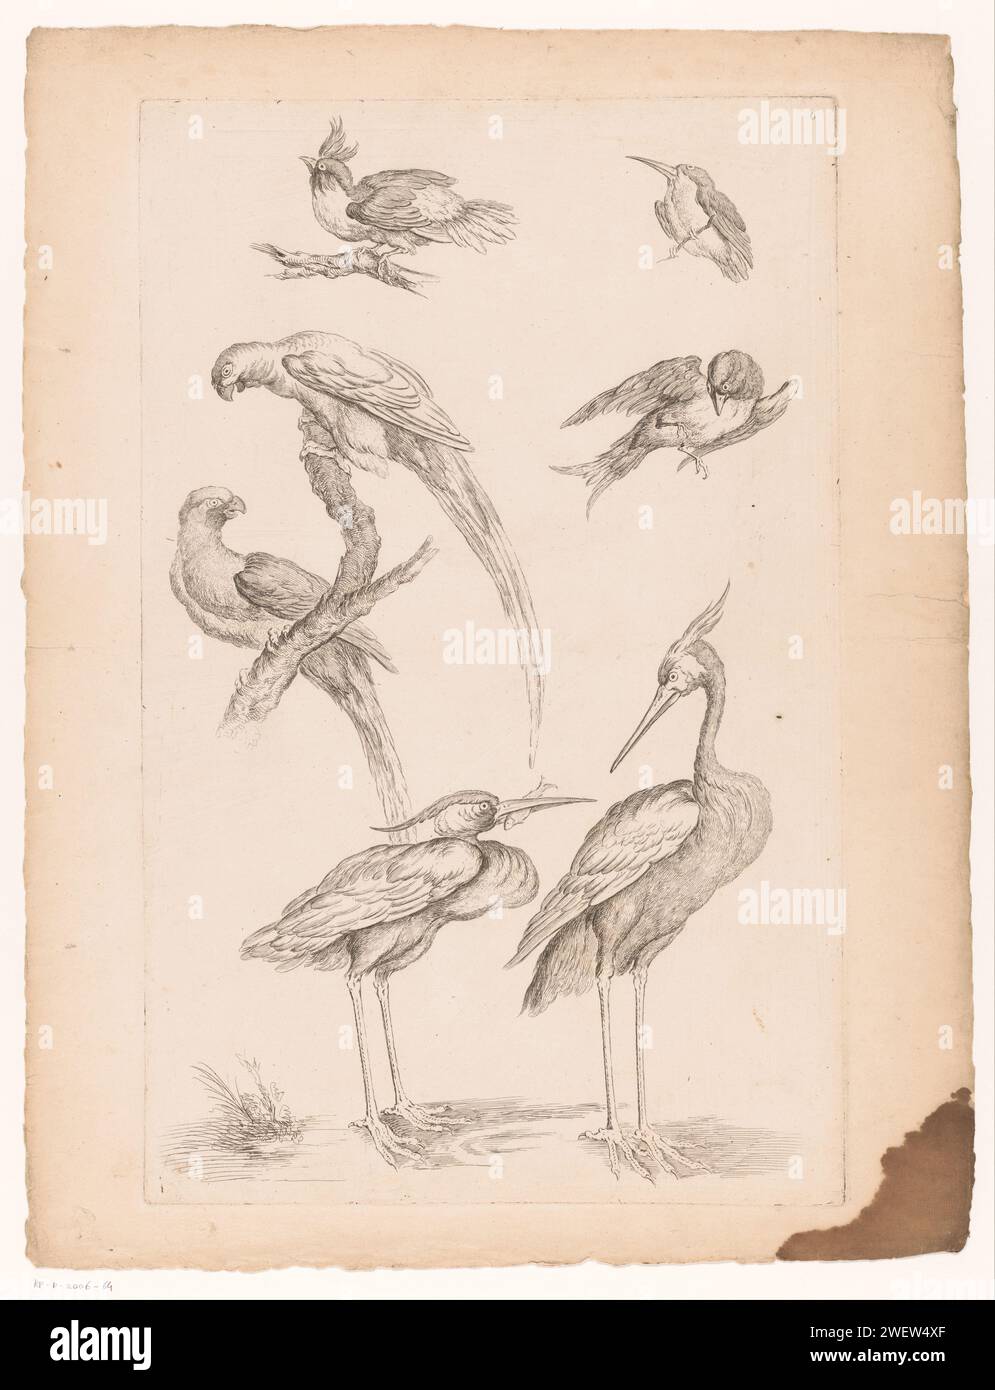 Seven Chinese birds, including herons and parrot -like, 1742 - 1750 print   paper etching birds. shore-birds and wading-birds: heron. ornamental birds: parrot Stock Photo